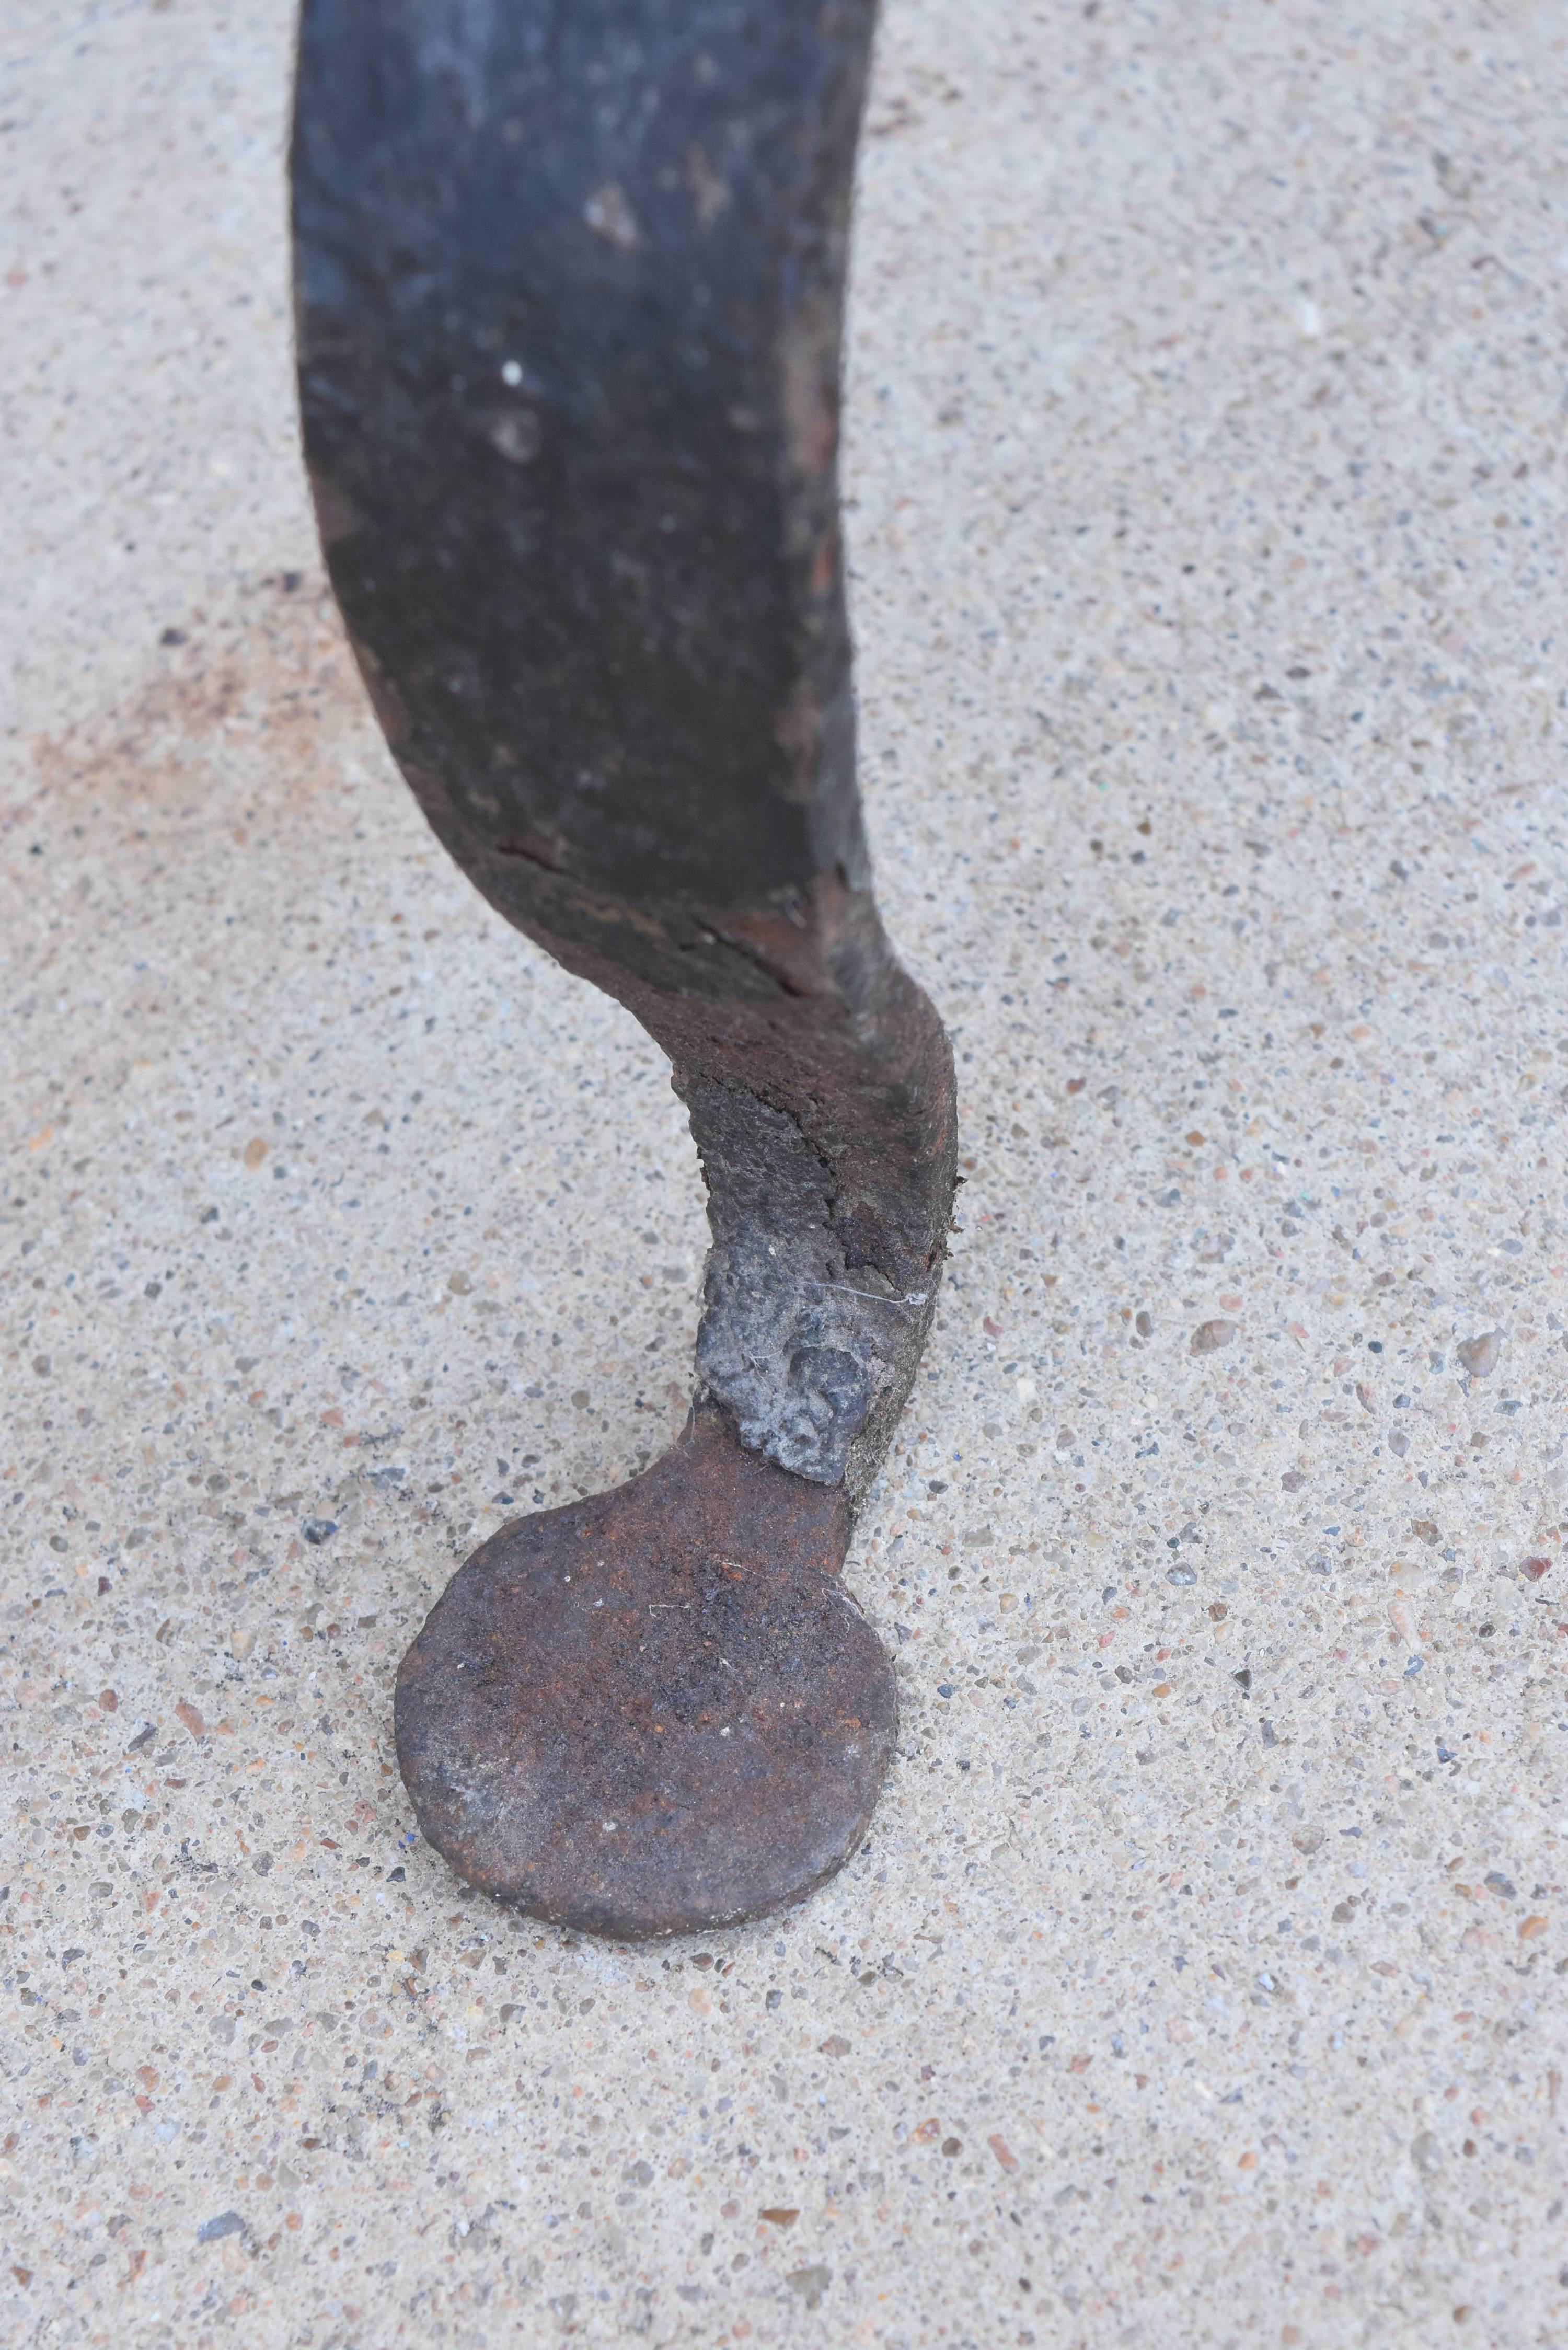 This is one of those rare piece that don't come along too often. It is heavy duty iron that has been hand-forged. It was wire at one point in Europe and it does need to be re-wired for us standard. Lots of character on this special find....
The